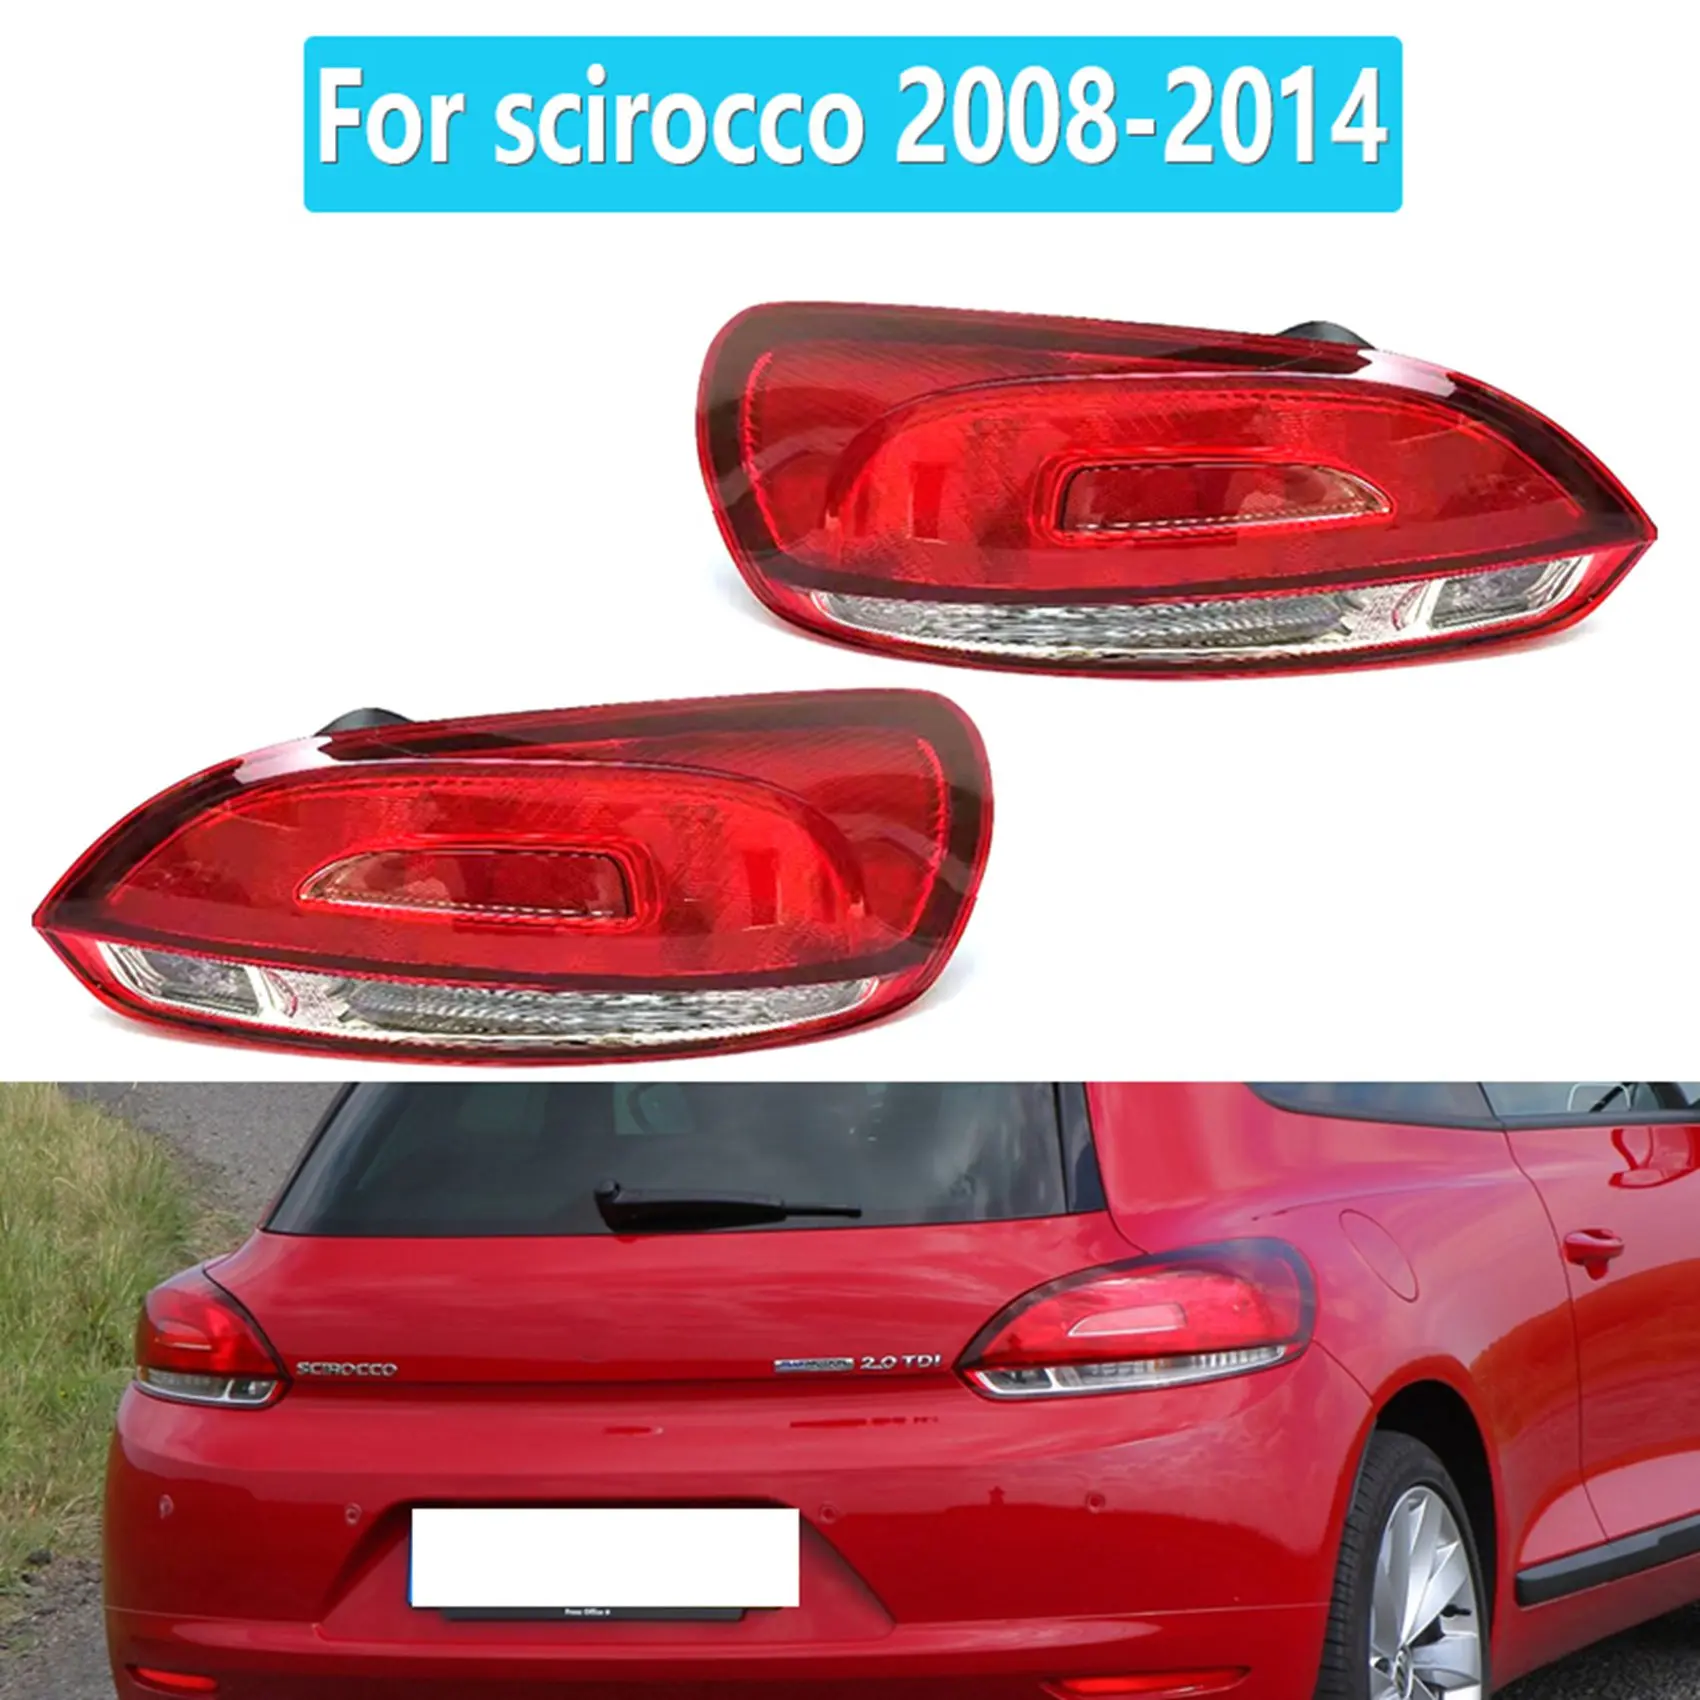 

Right Tail Light Rear Brake Lamp Without Bulb Stop Warning Lights For-VW Scirocco 2008-2014 1K8945096R 1K8945095G